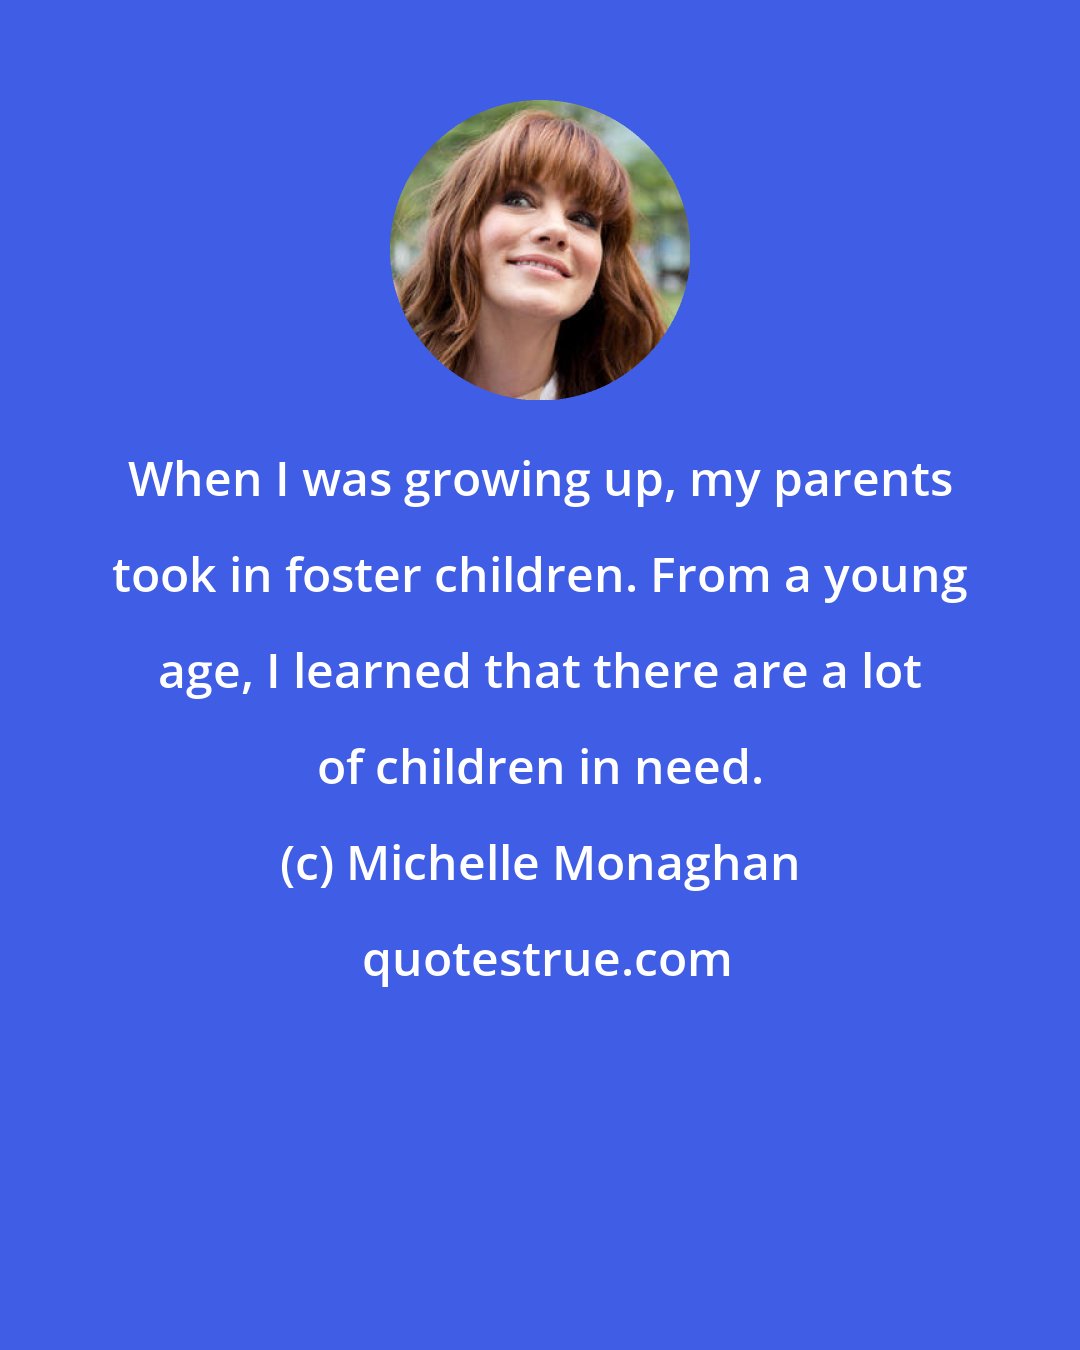 Michelle Monaghan: When I was growing up, my parents took in foster children. From a young age, I learned that there are a lot of children in need.